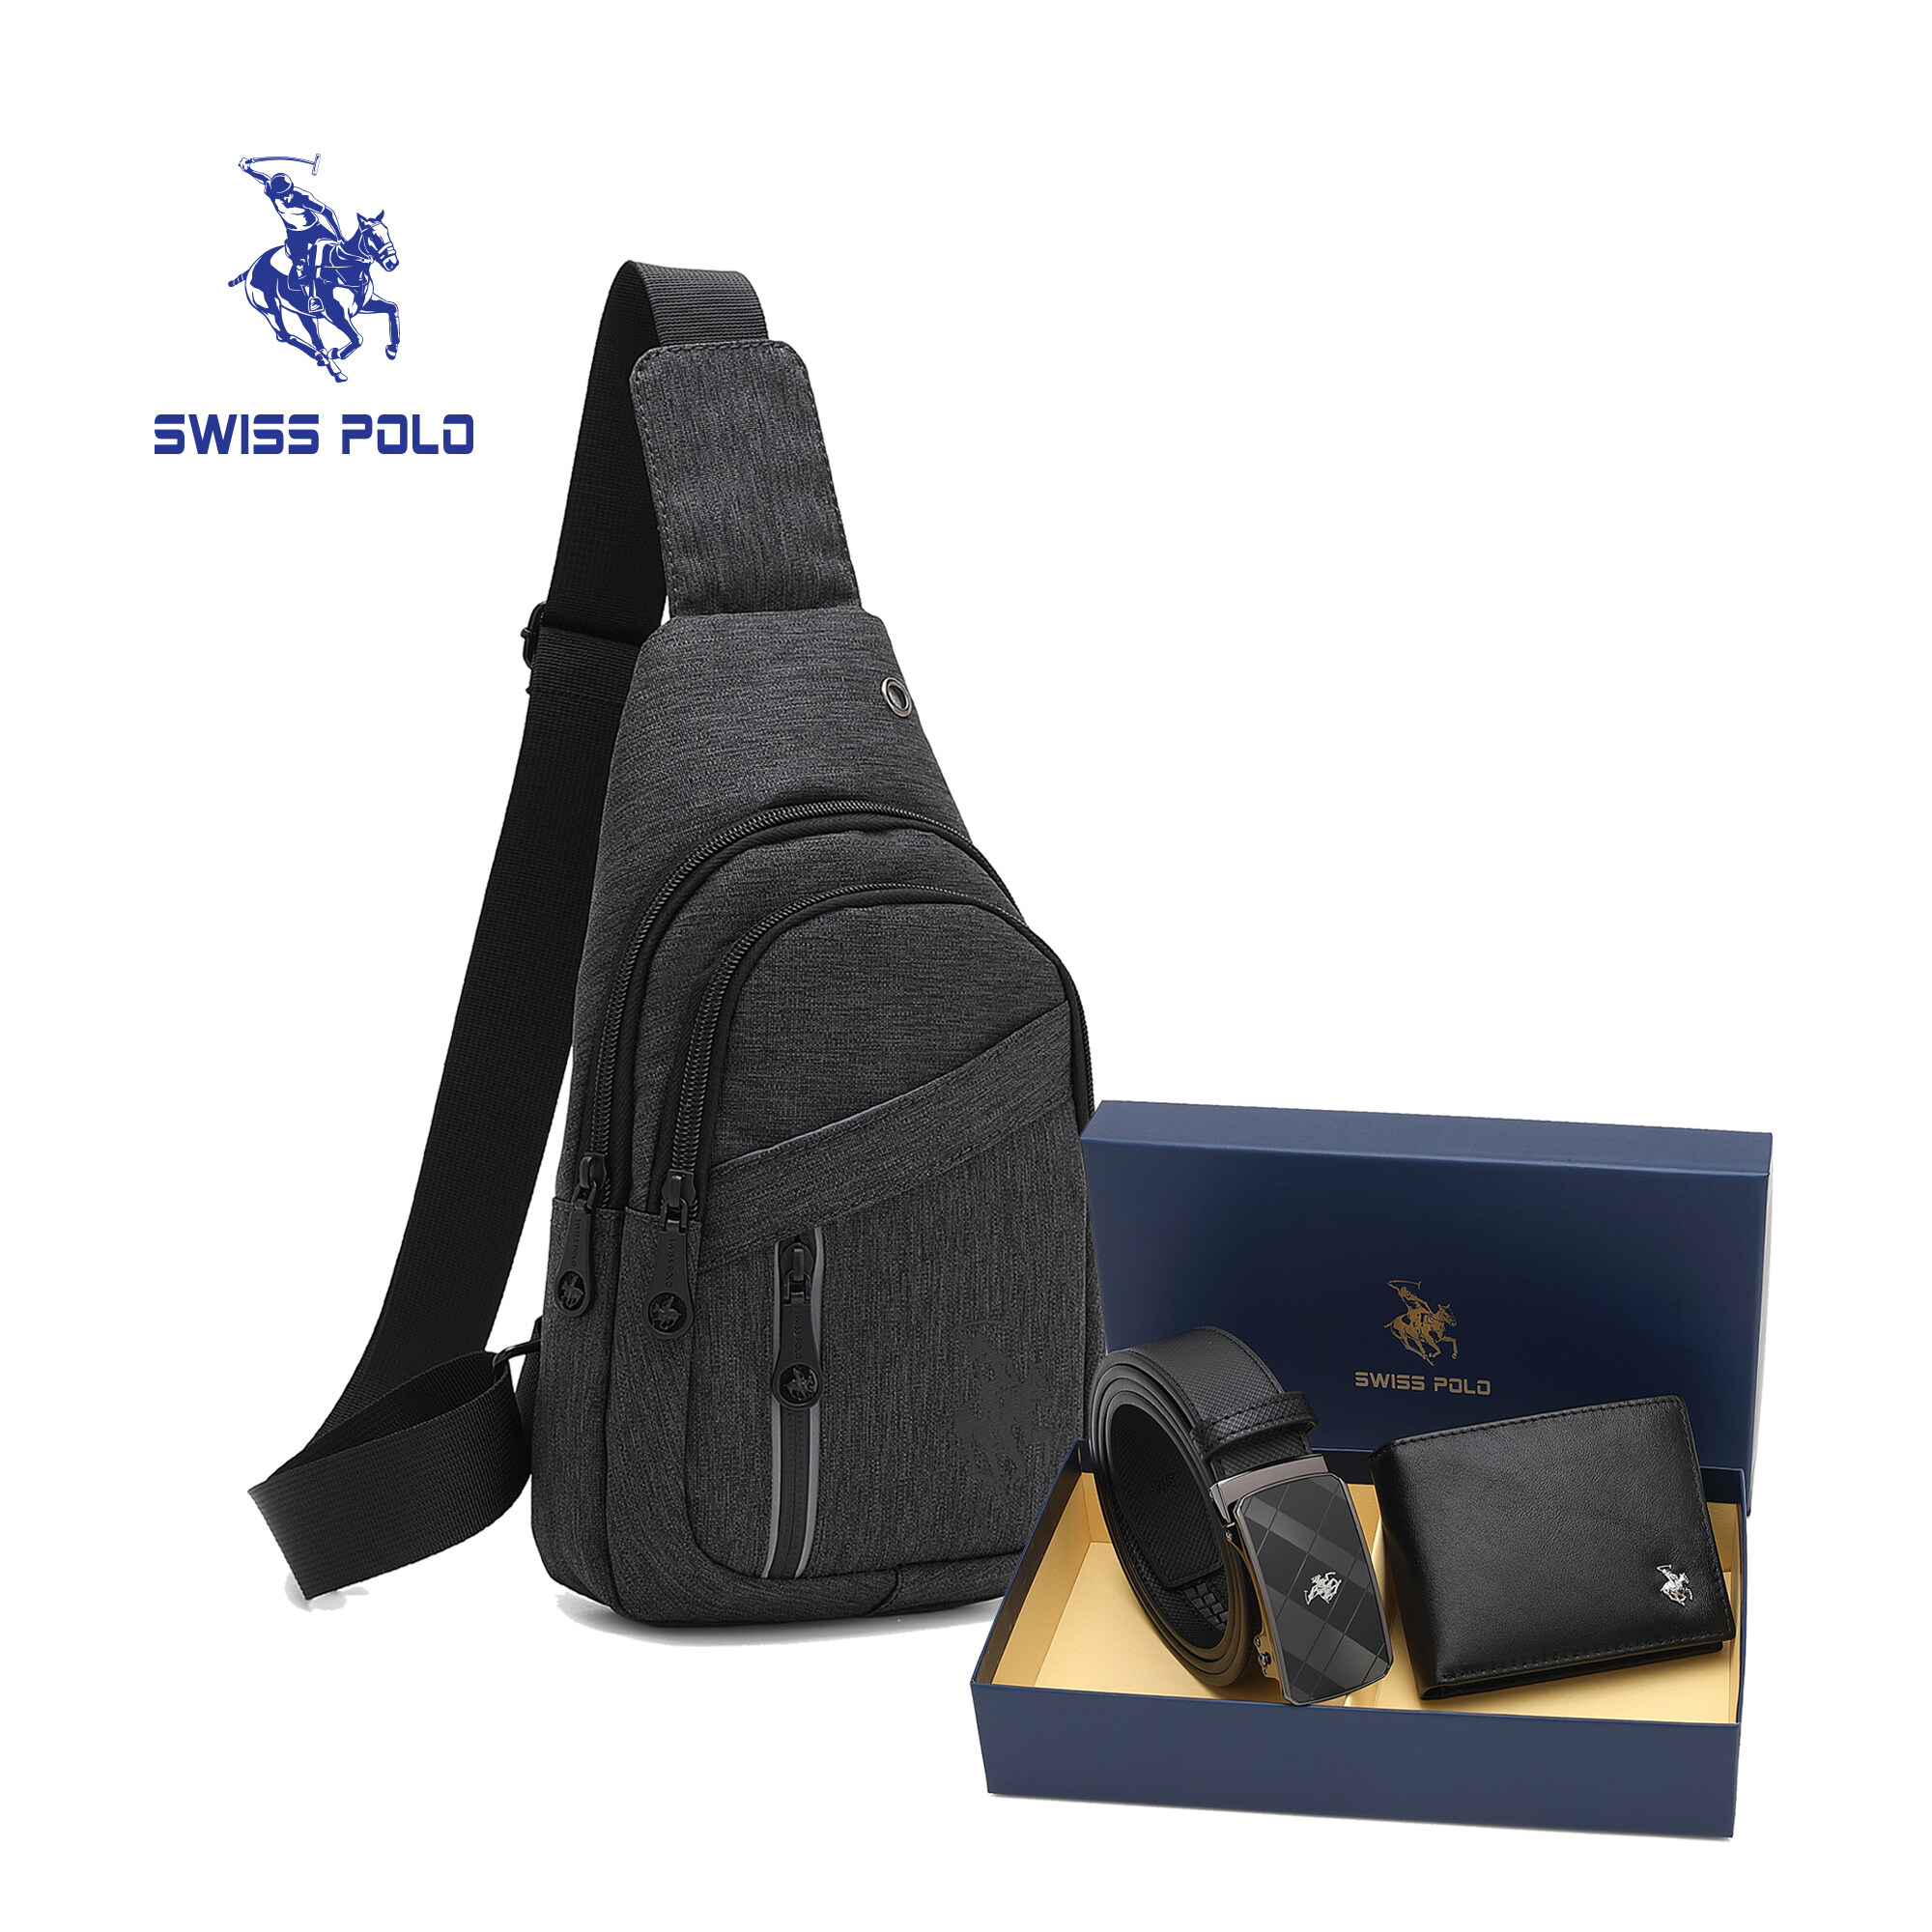 SWISS POLO Gift Set/ Box Wallet With Belt SGS 568-8 BLUE/GREY